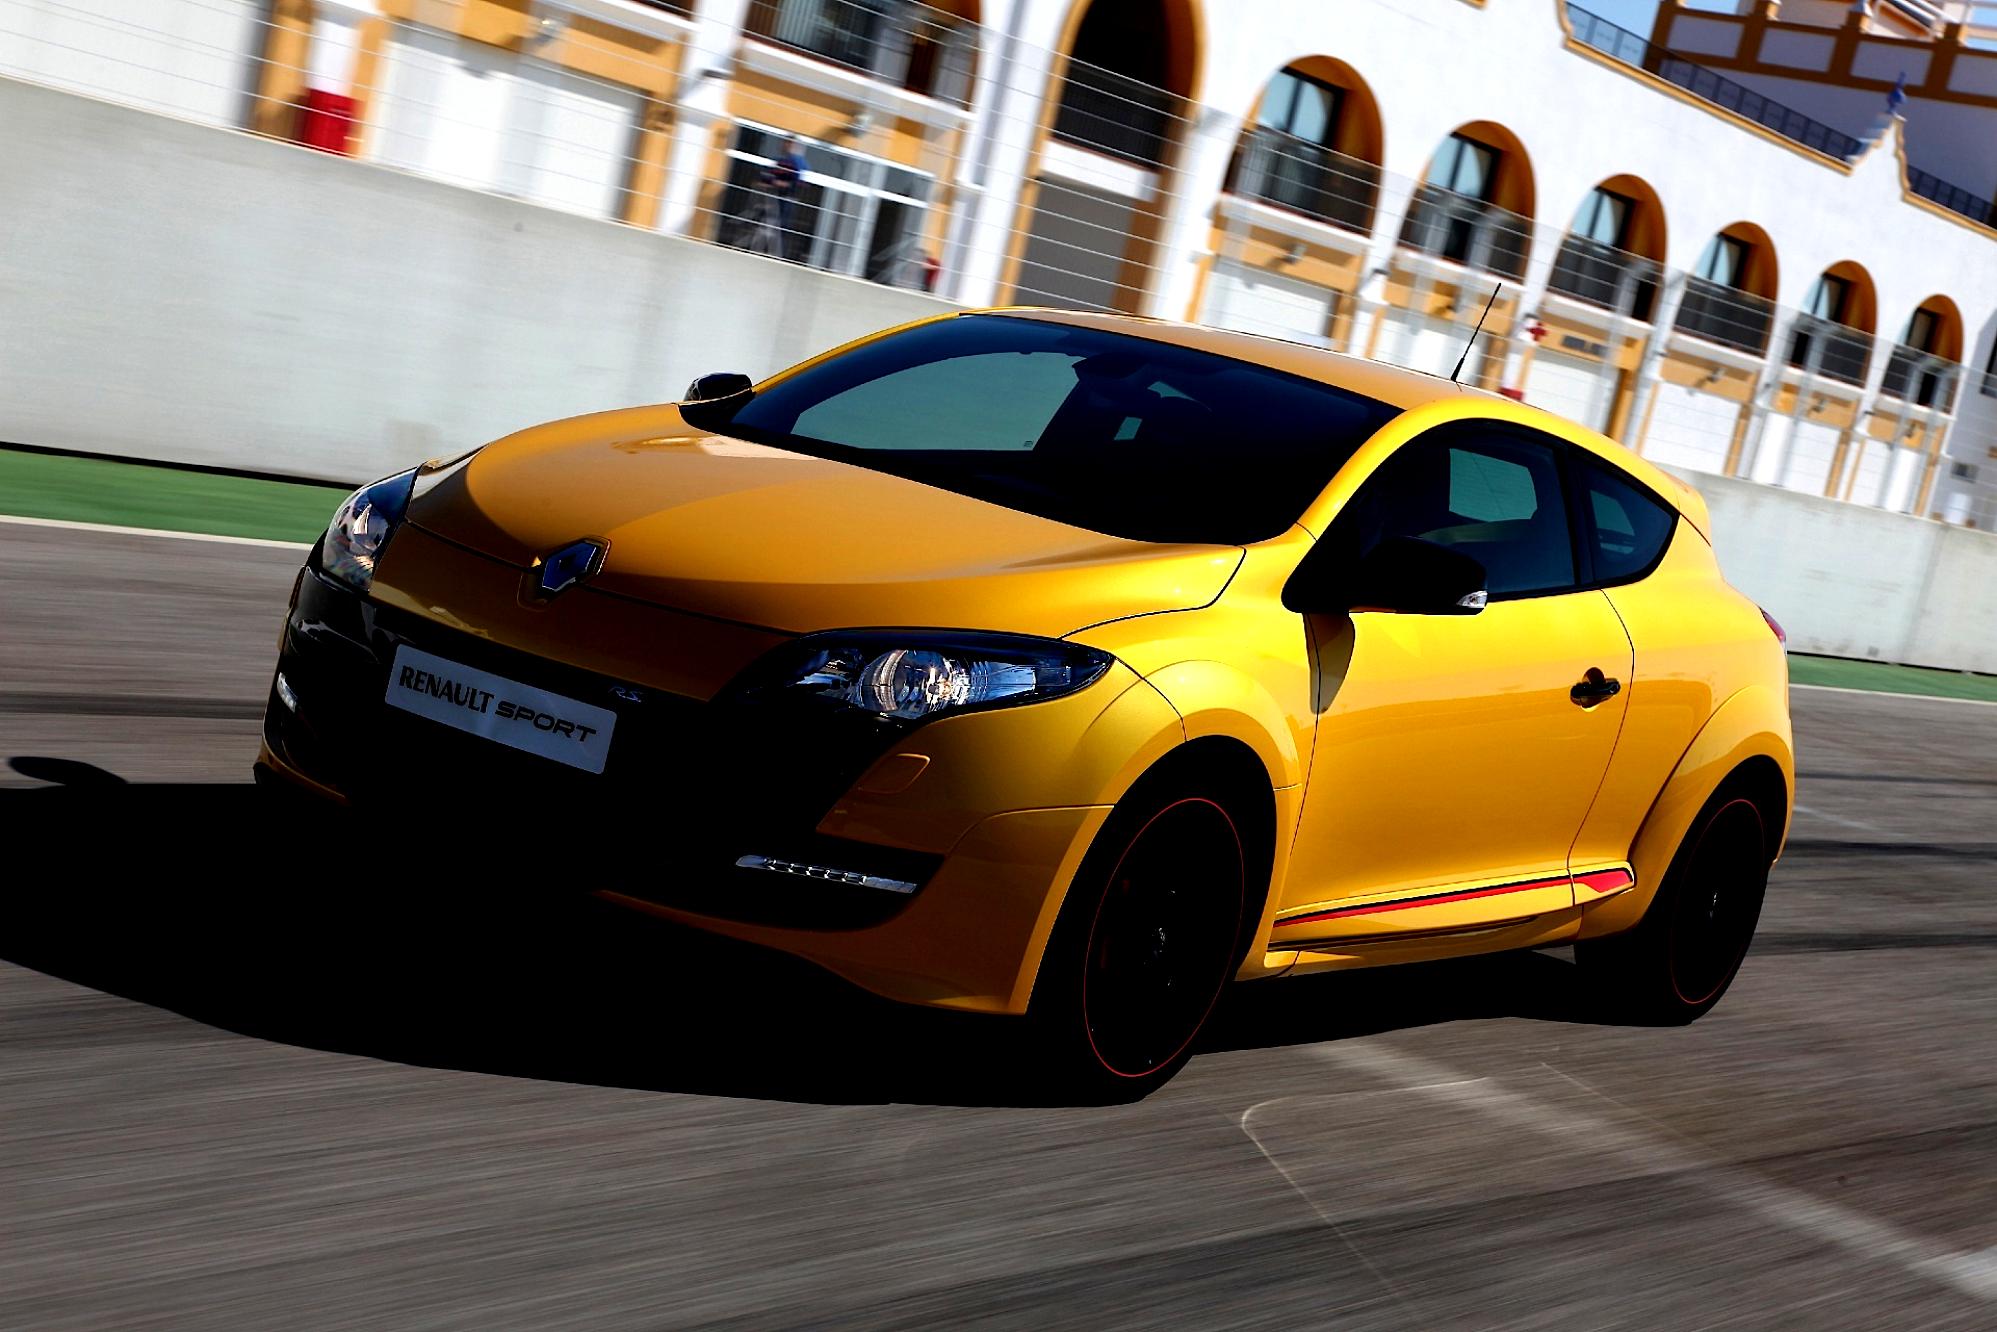 Renault Megane RS Coupe 2009 #64